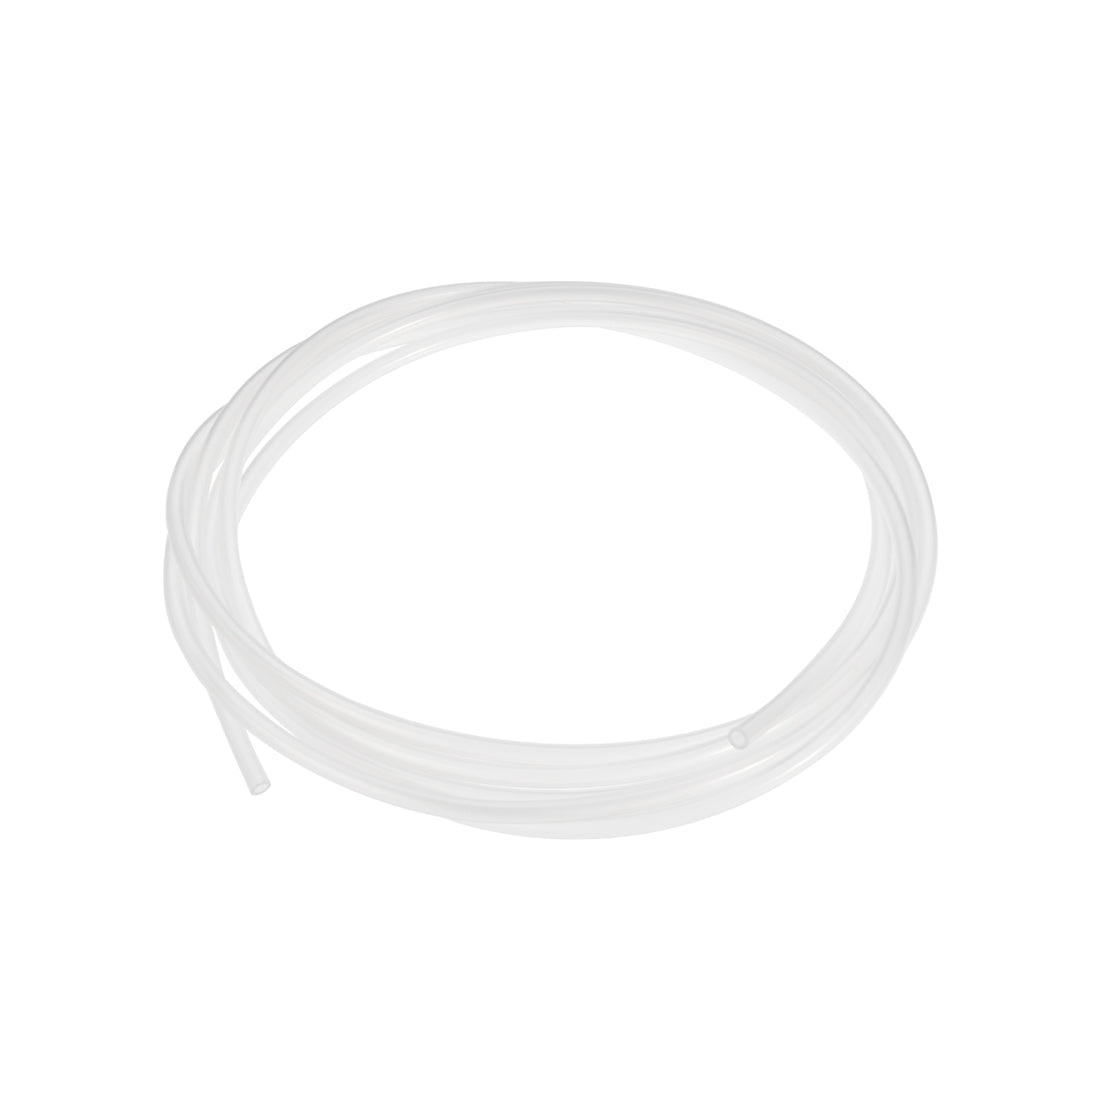 Uxcell Uxcell 3mm OD 2mm ID 3 Meter Long Nylon Tube for Air Line Brake Fluid Transfer Clear